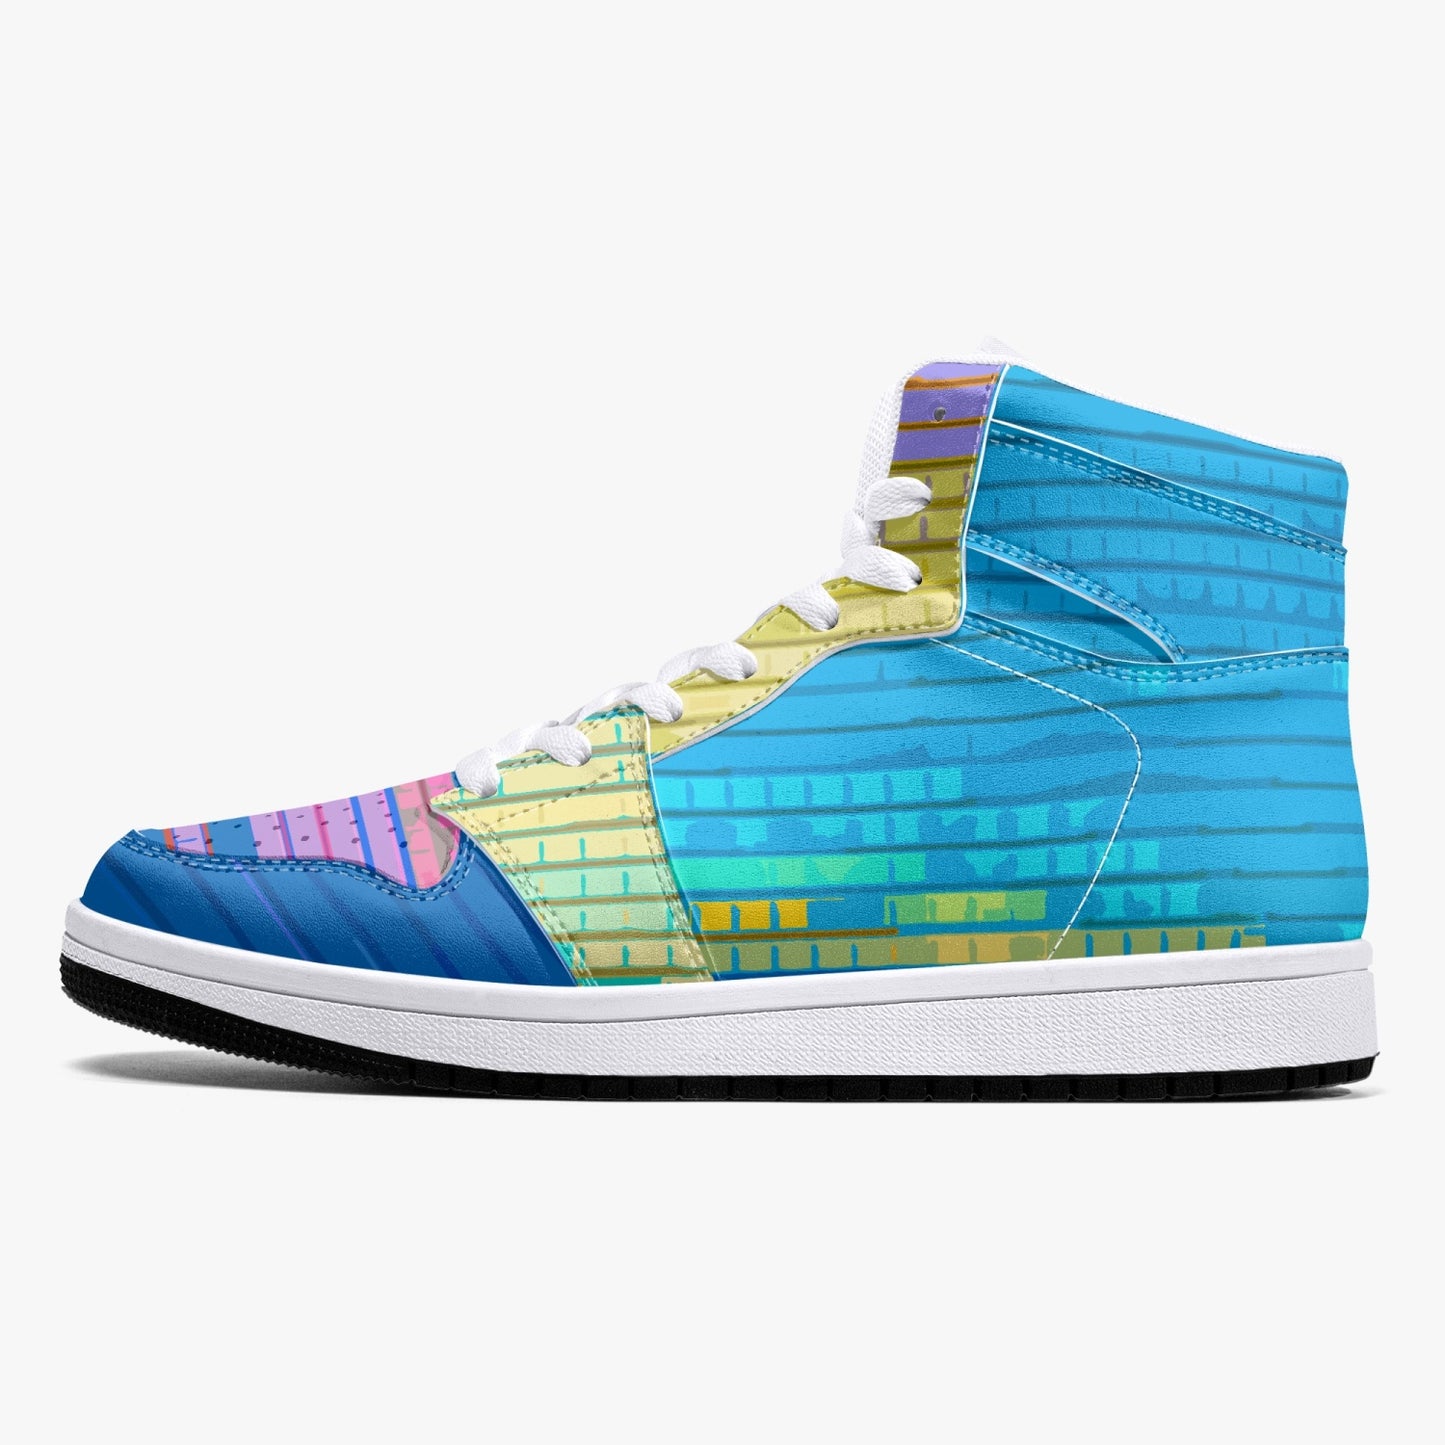 Almost Blue I - Macr.in (High-Top Leather Sneakers)